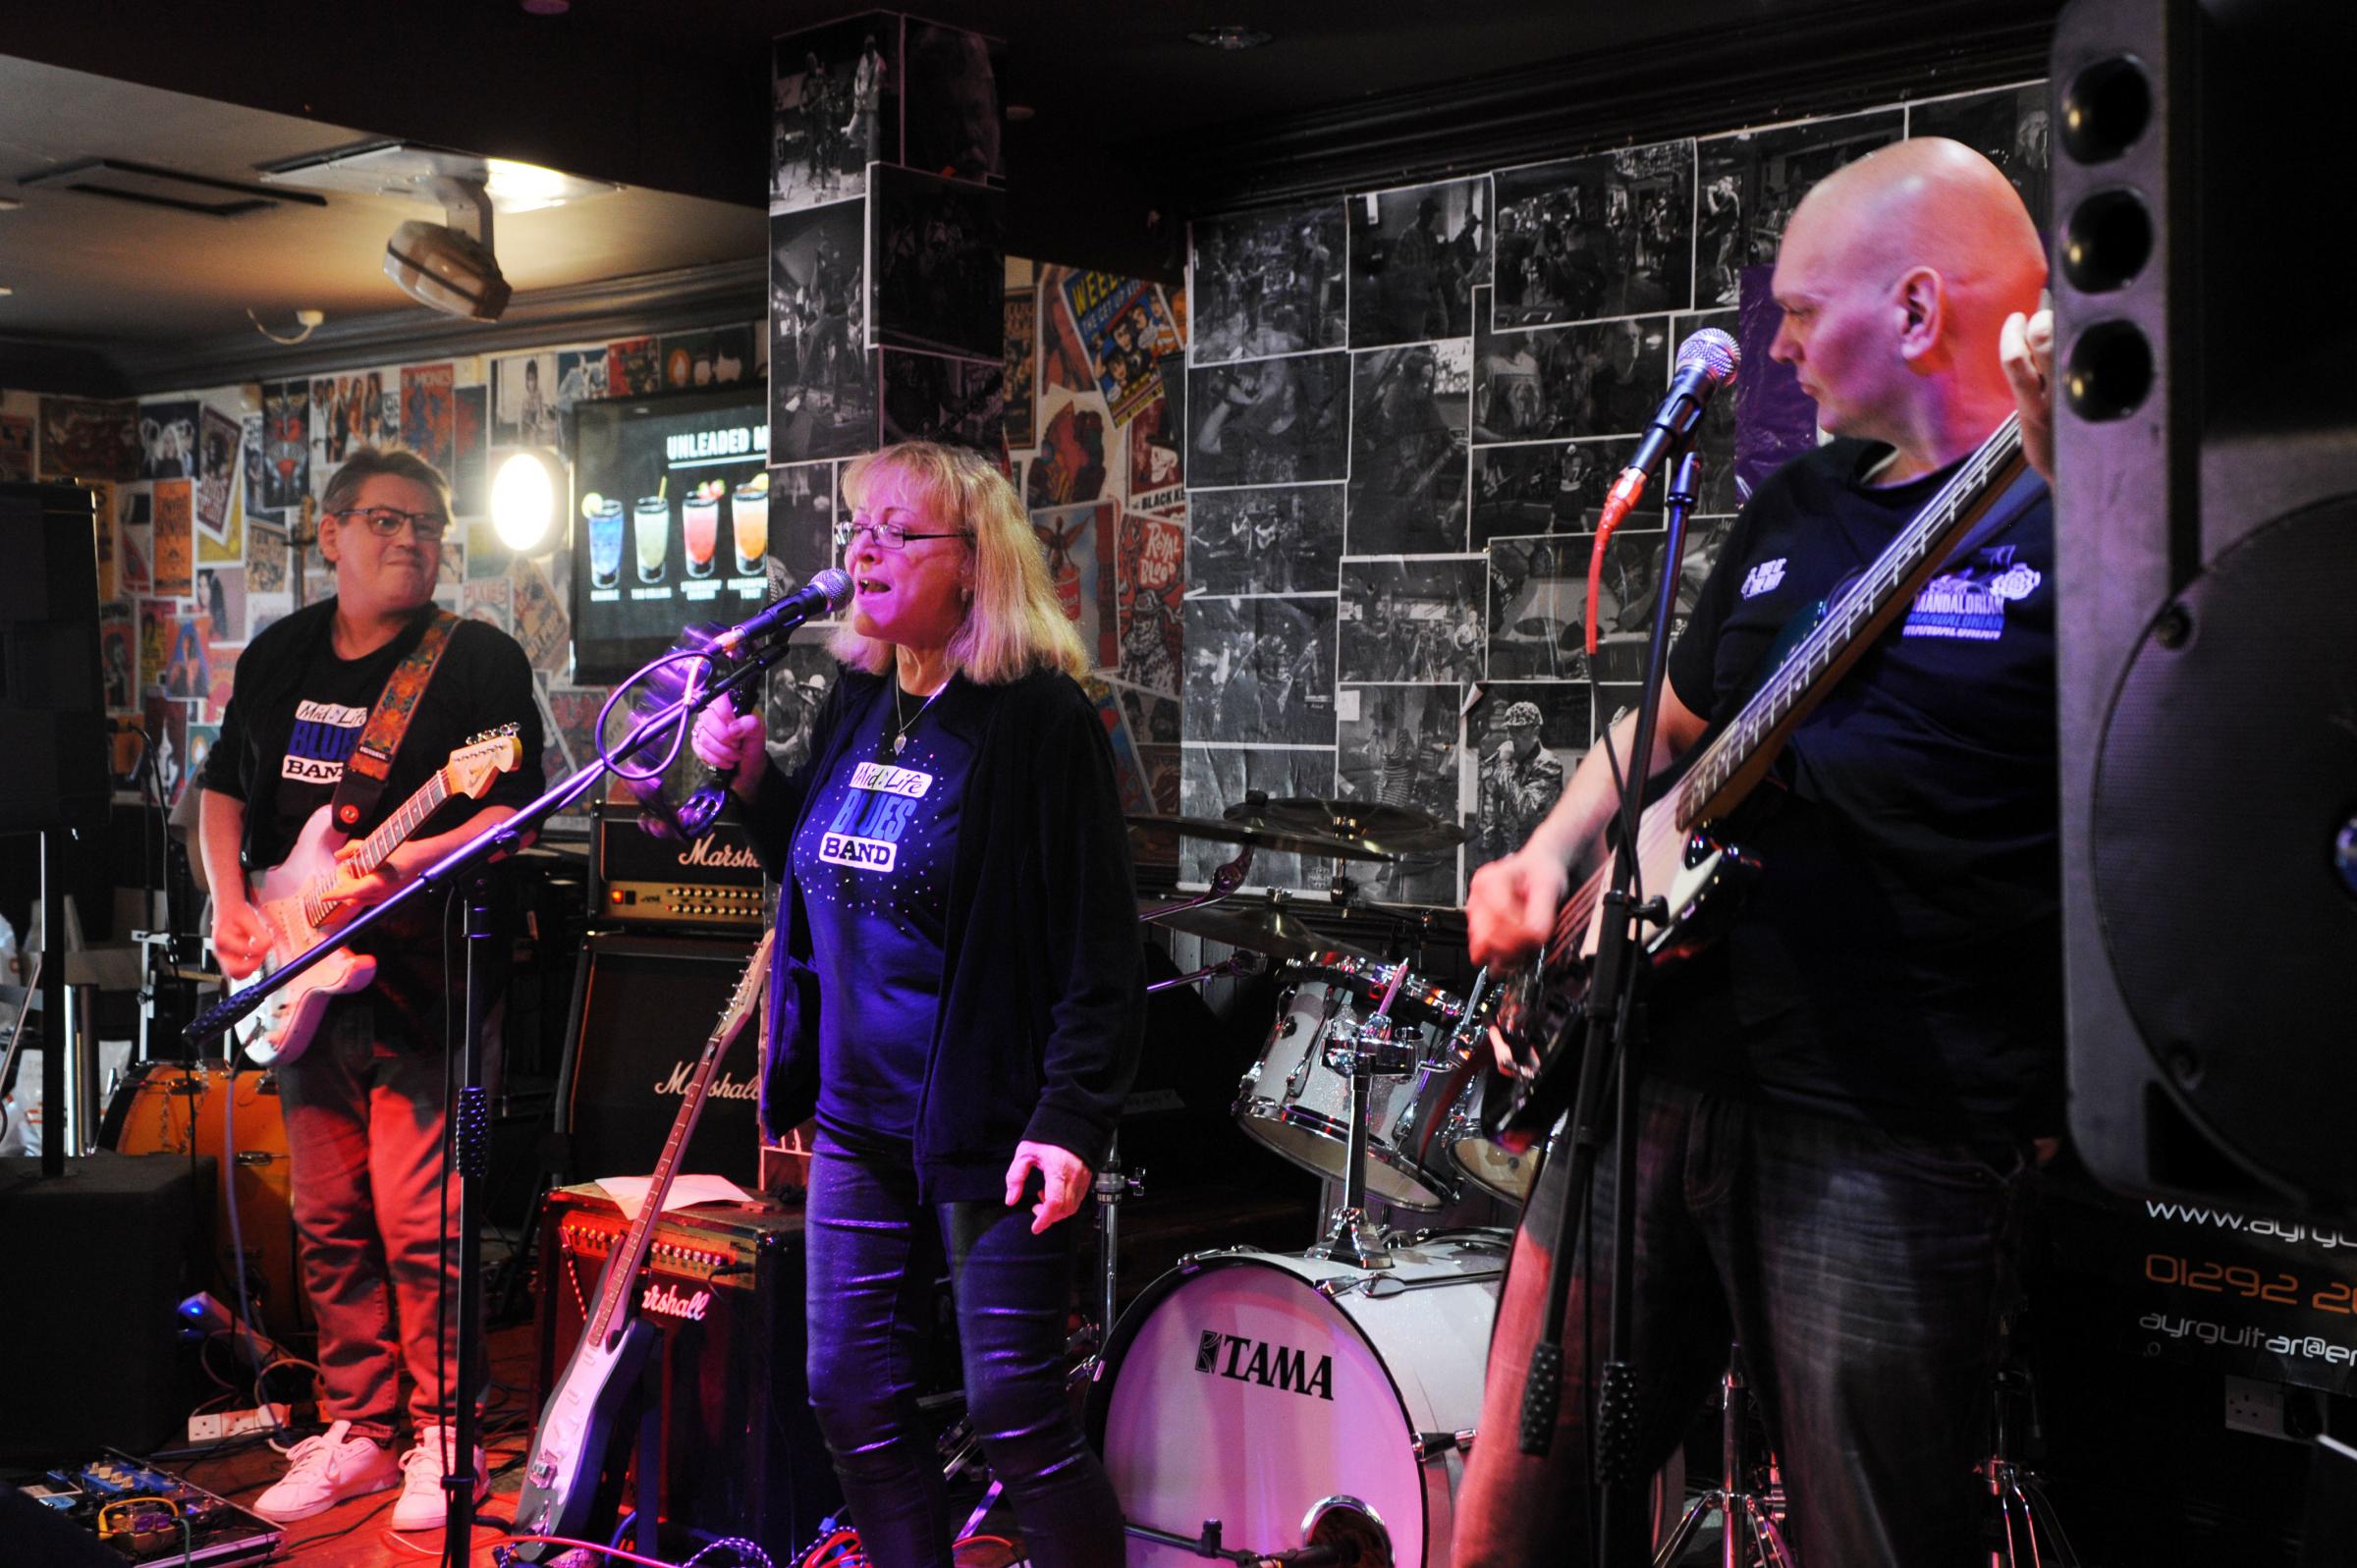 The Rock The Nile family fund-raiser gave a boost to the Crohns & Colitis UK charity (Image: Charlie GIlmour)